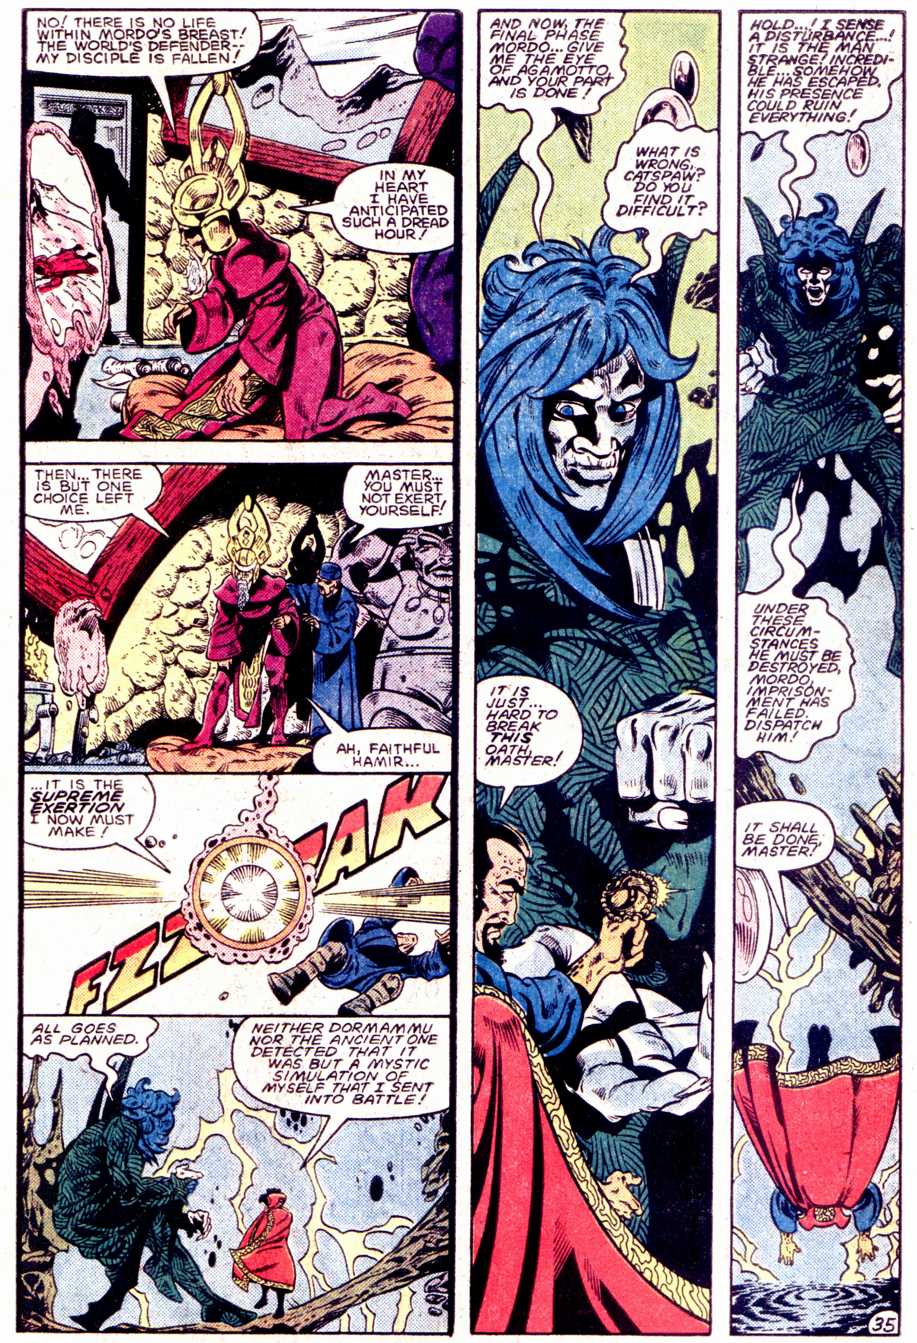 What If? (1977) issue 40 - Dr Strange had not become master of The mystic arts - Page 36